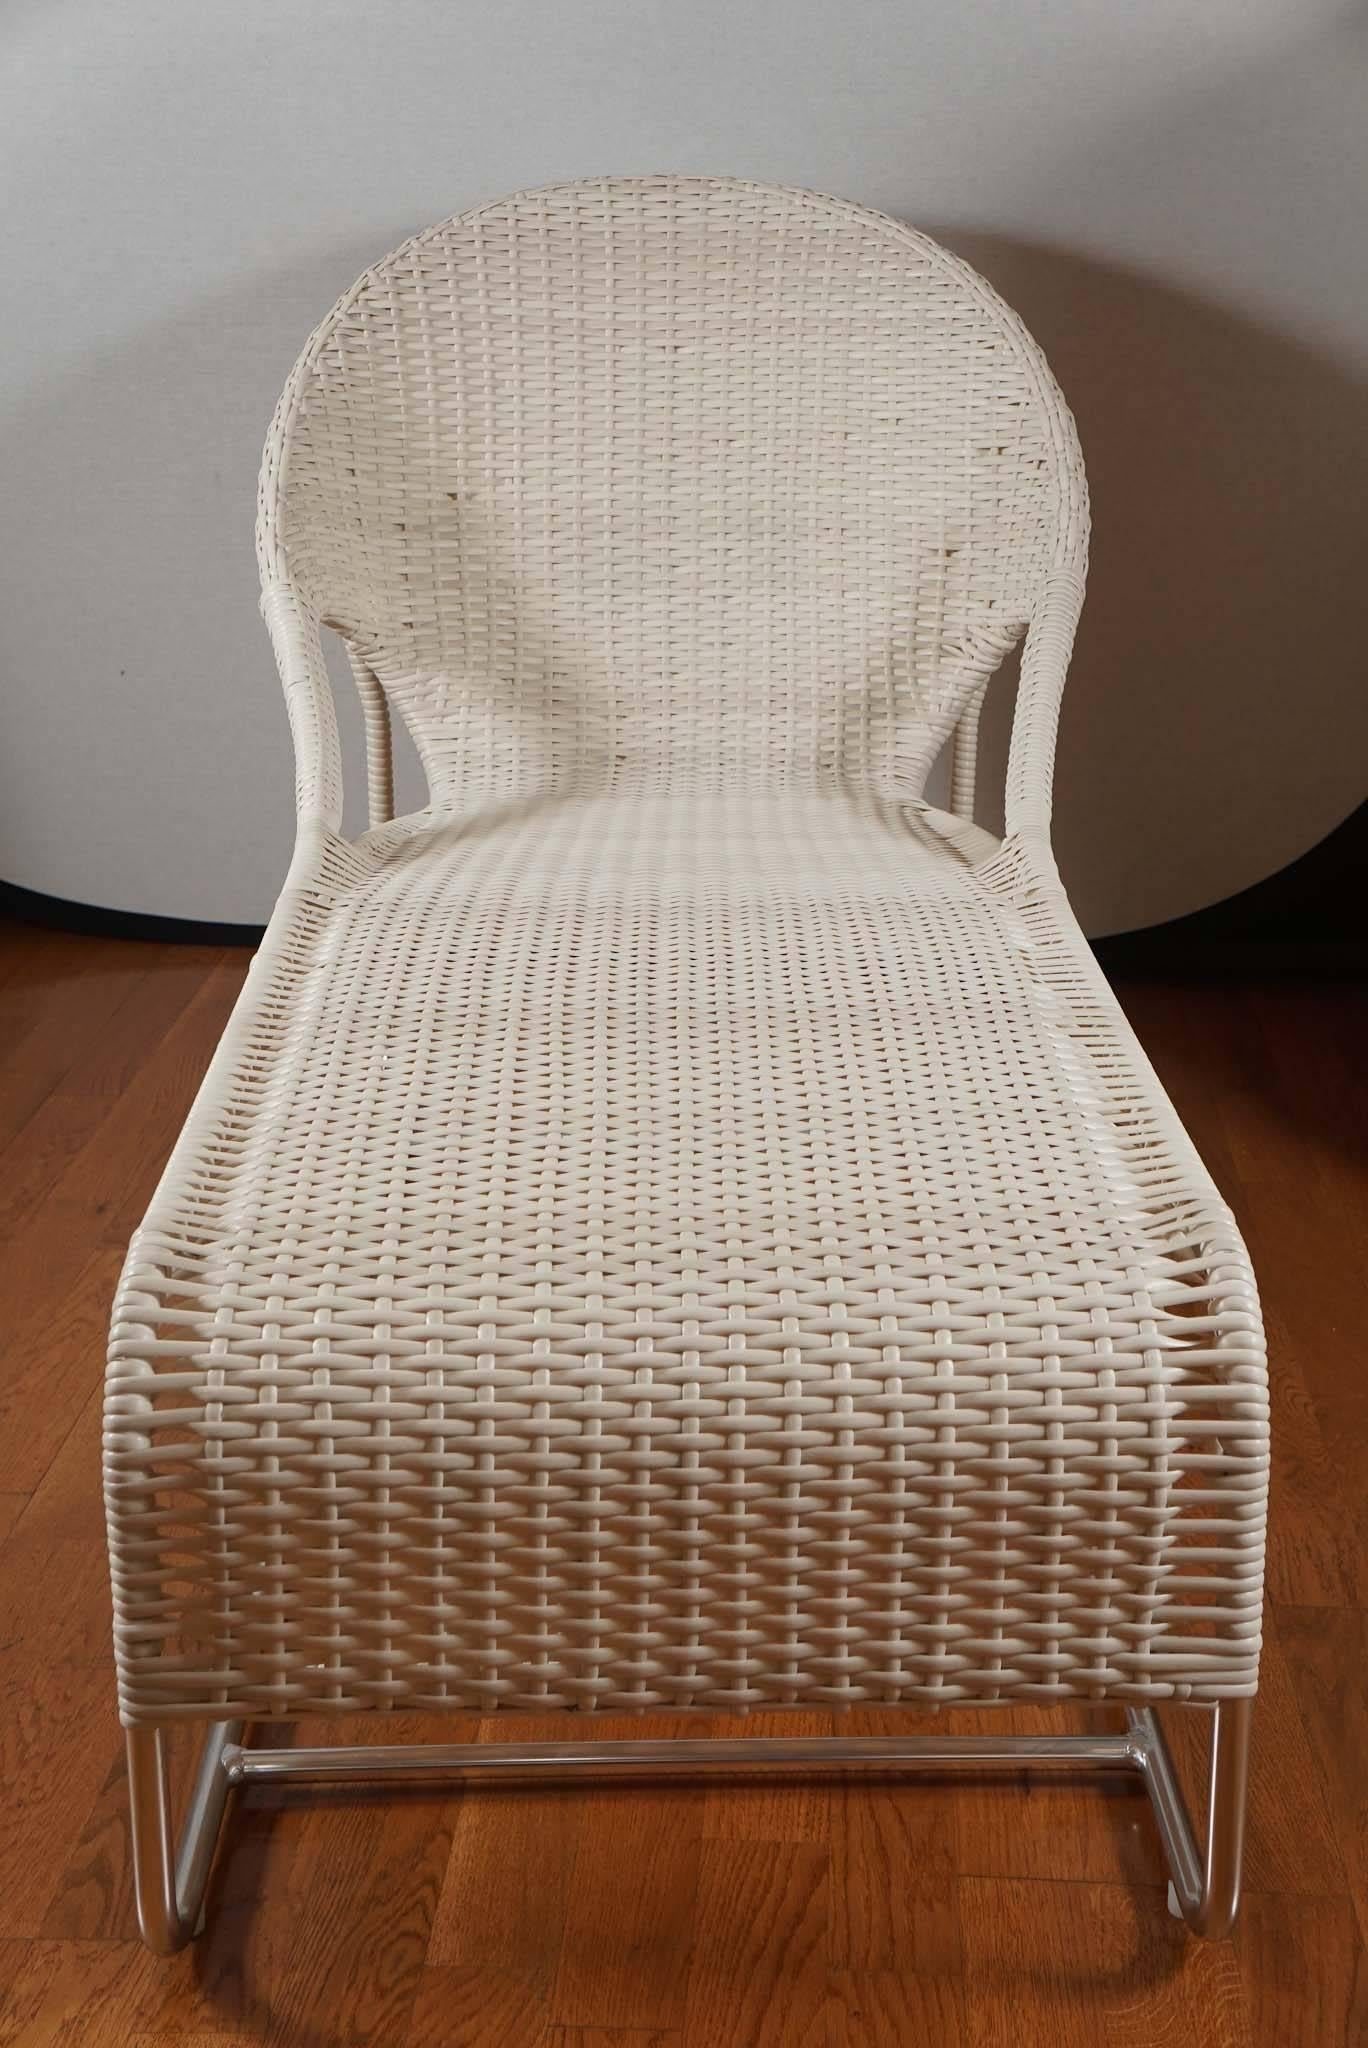 Woven chaise with hooped back and open sides. Updated for the outdoors.
Shown in white polypropylene on a brushed aluminum frame.
Also available in natural and blue and white striped polypropylene.